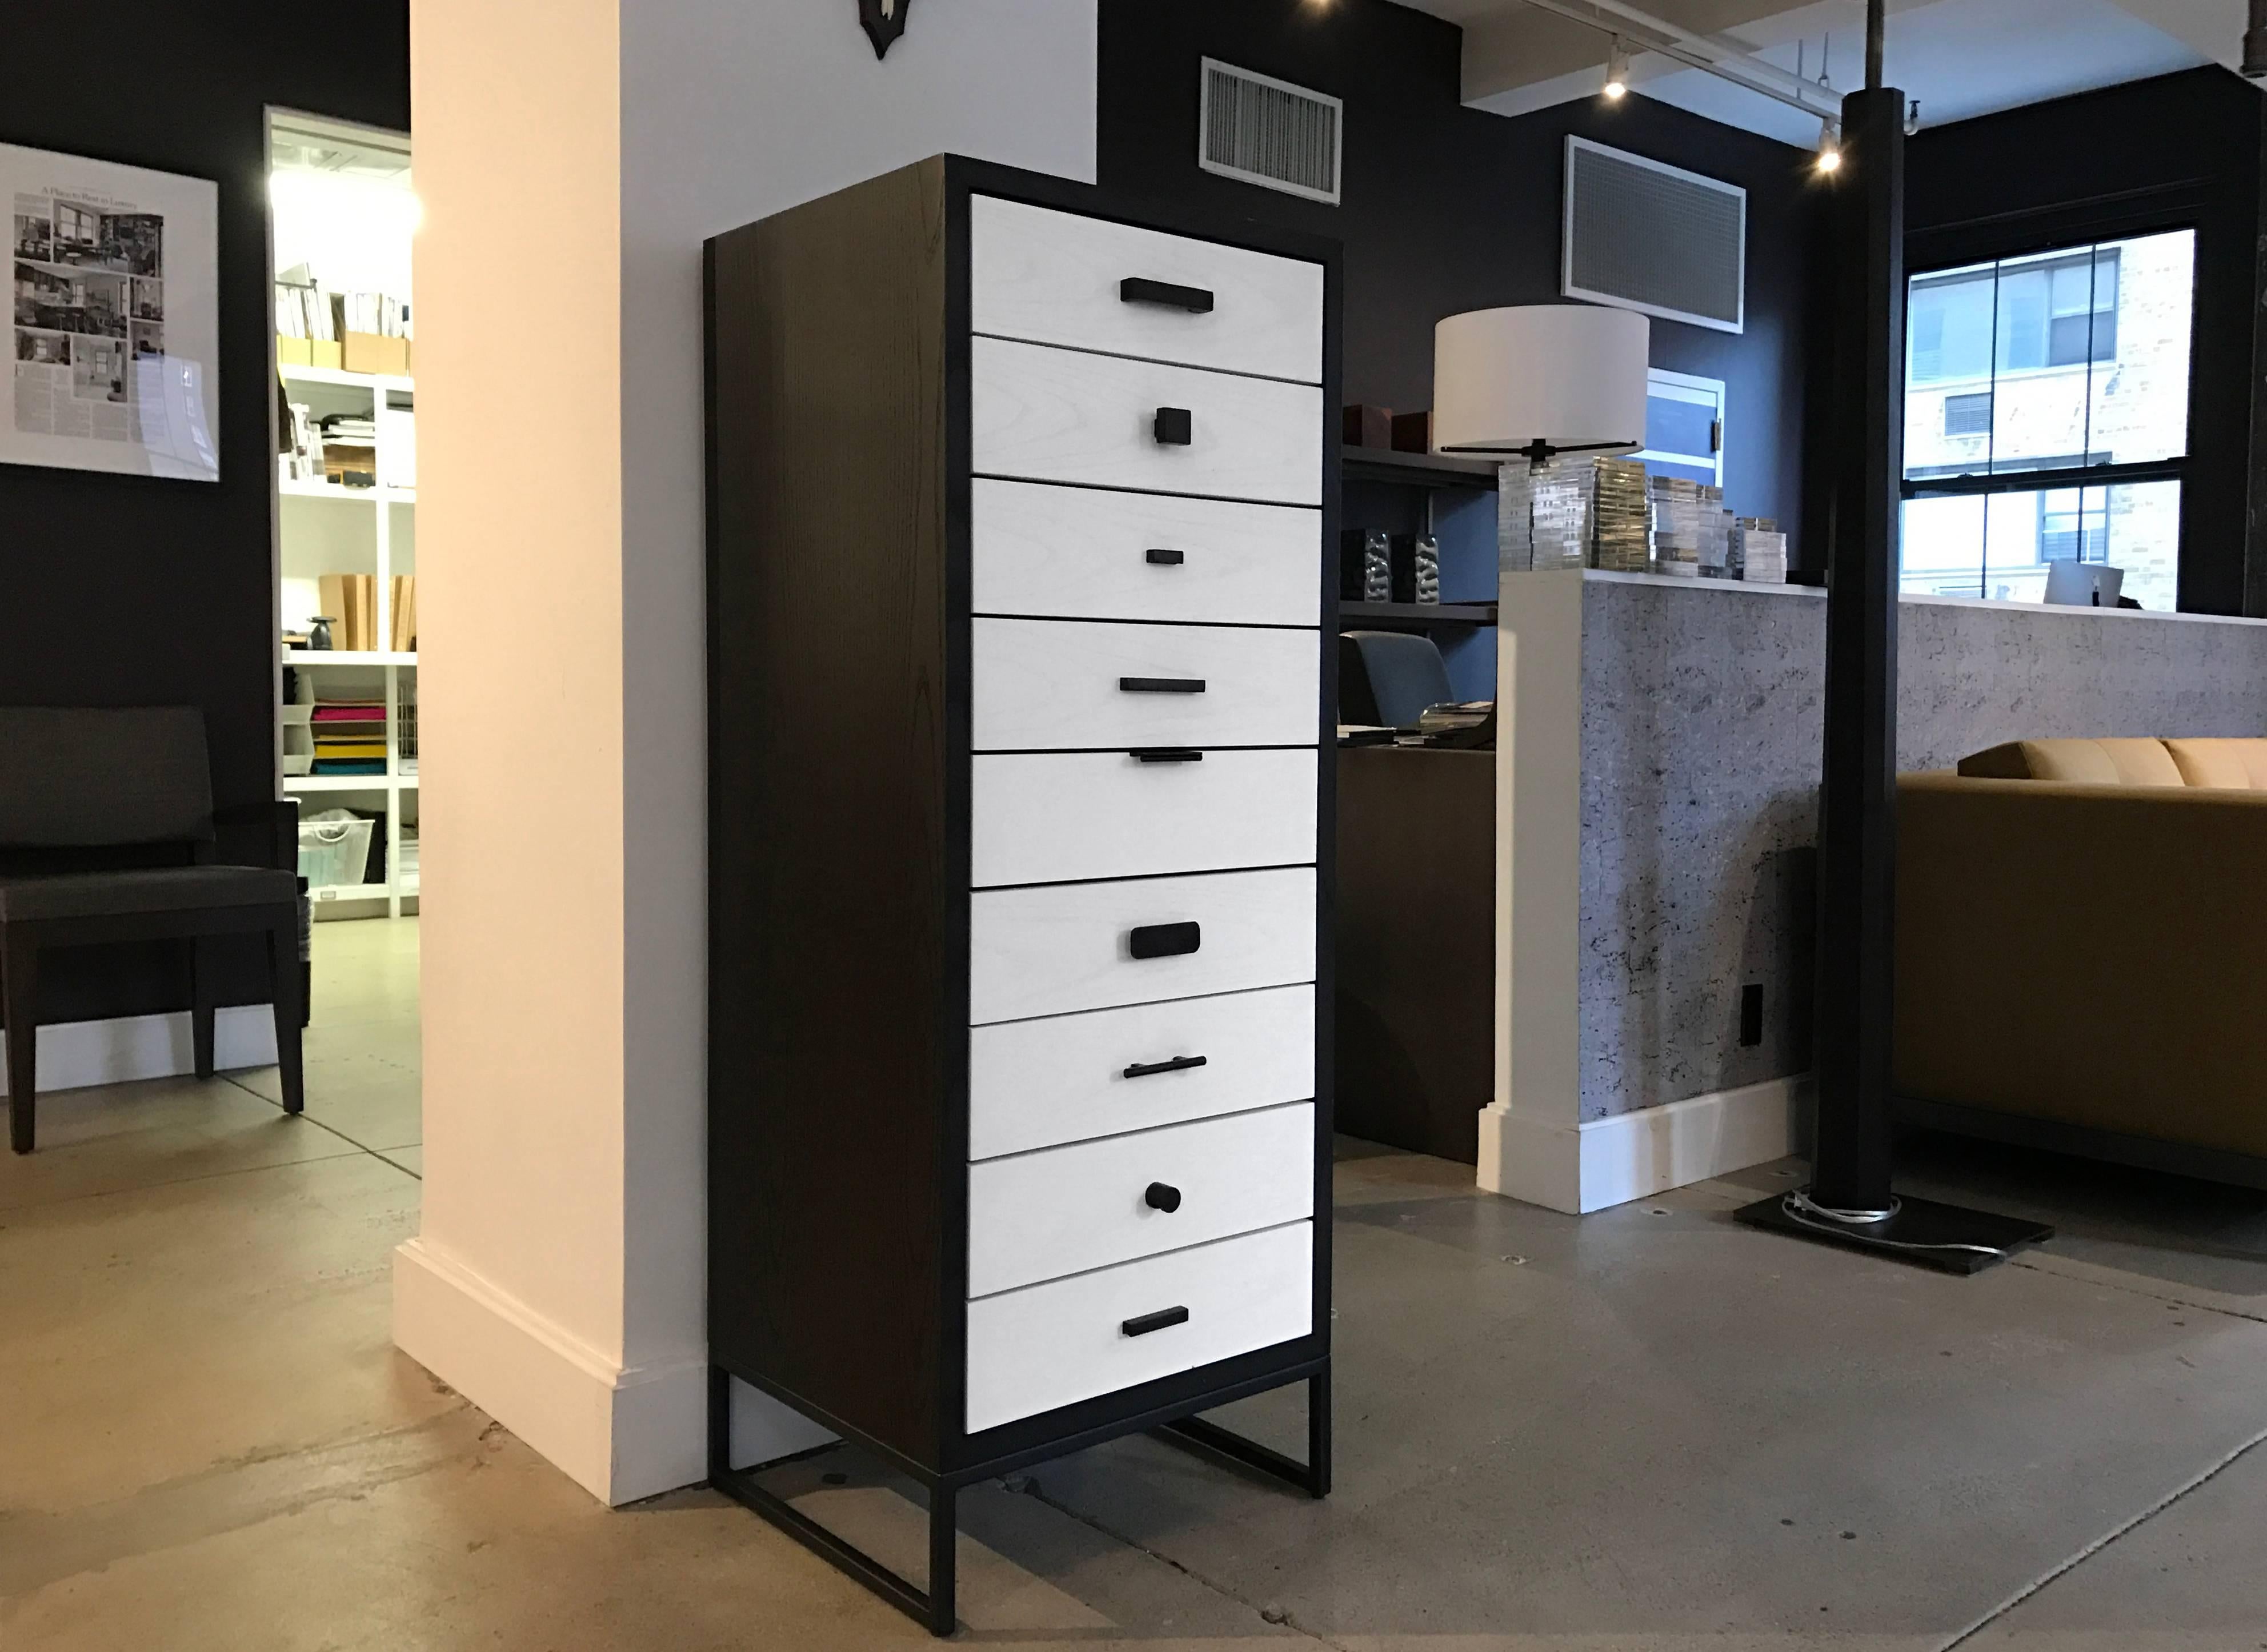 Available and shown in charcoal ash case white ash drawers and black oxide base + all pull options.
Measure: 18in x 20in x 53in H.

